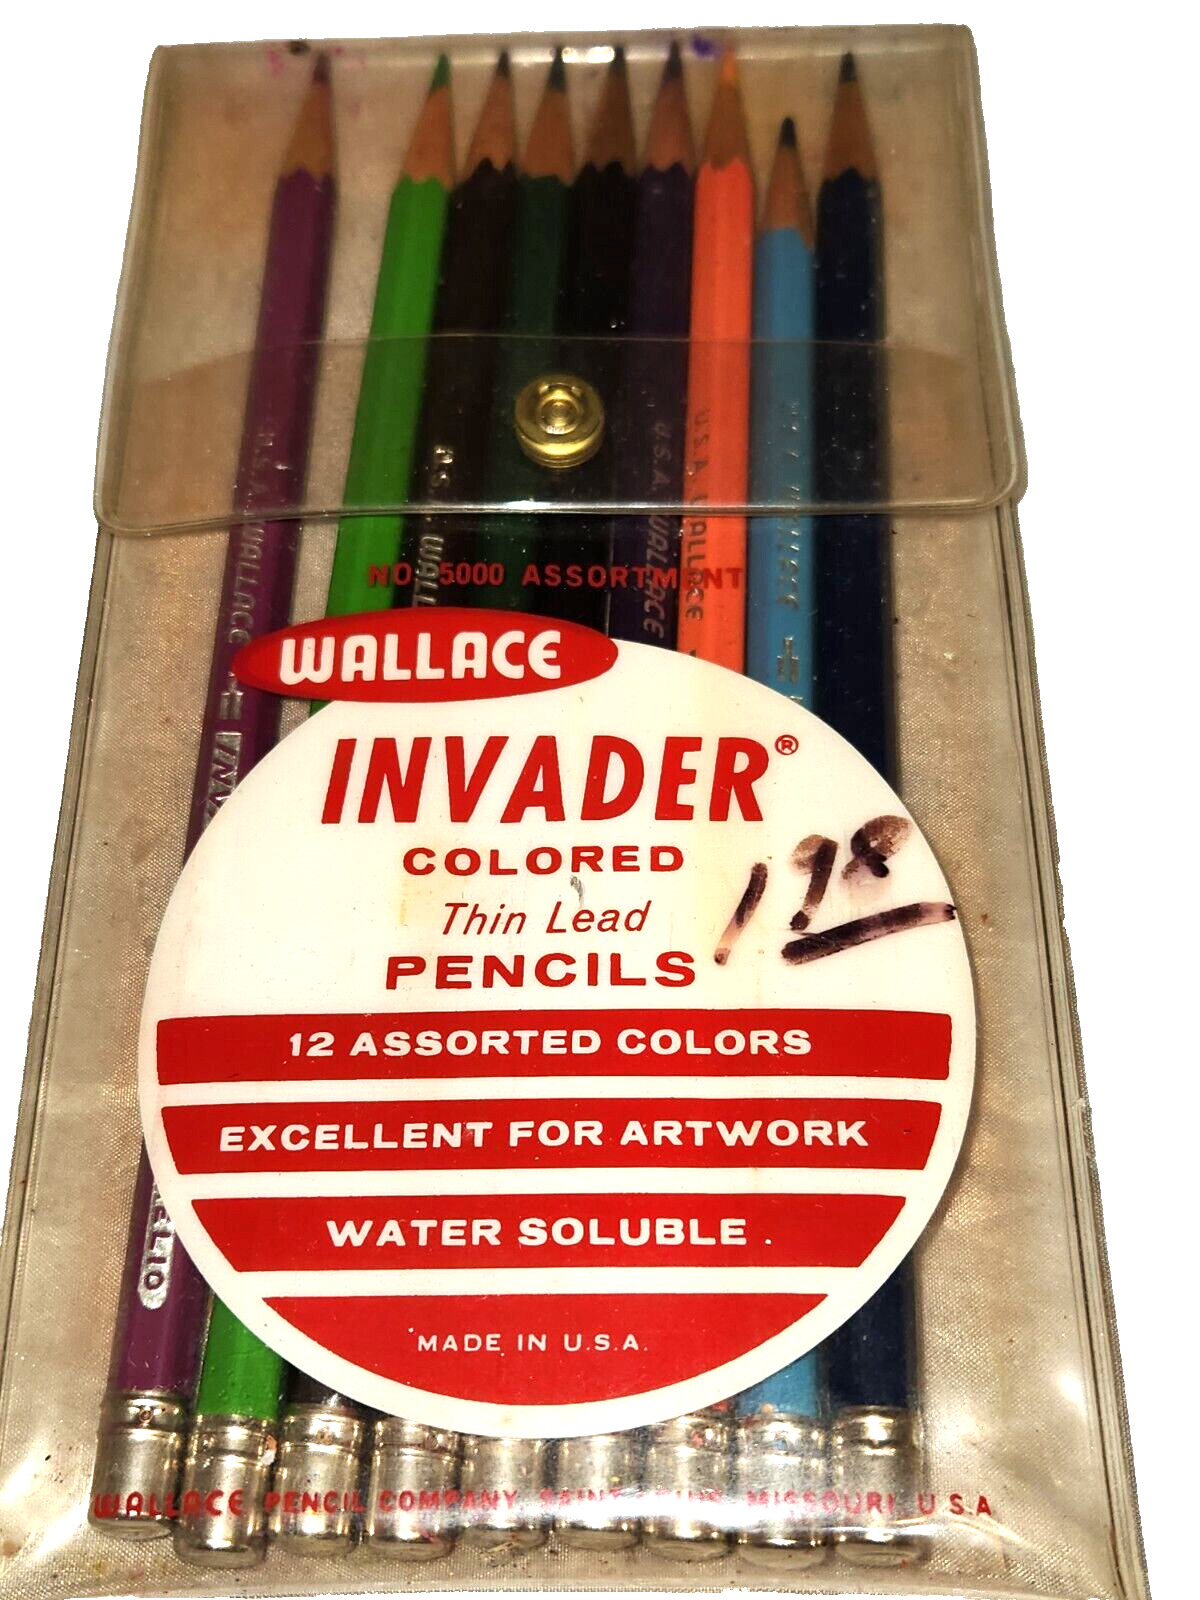 VTG Wallace Silver Band Invader No. 5000 9 Colored Lead Pencils in Orig Pkg.